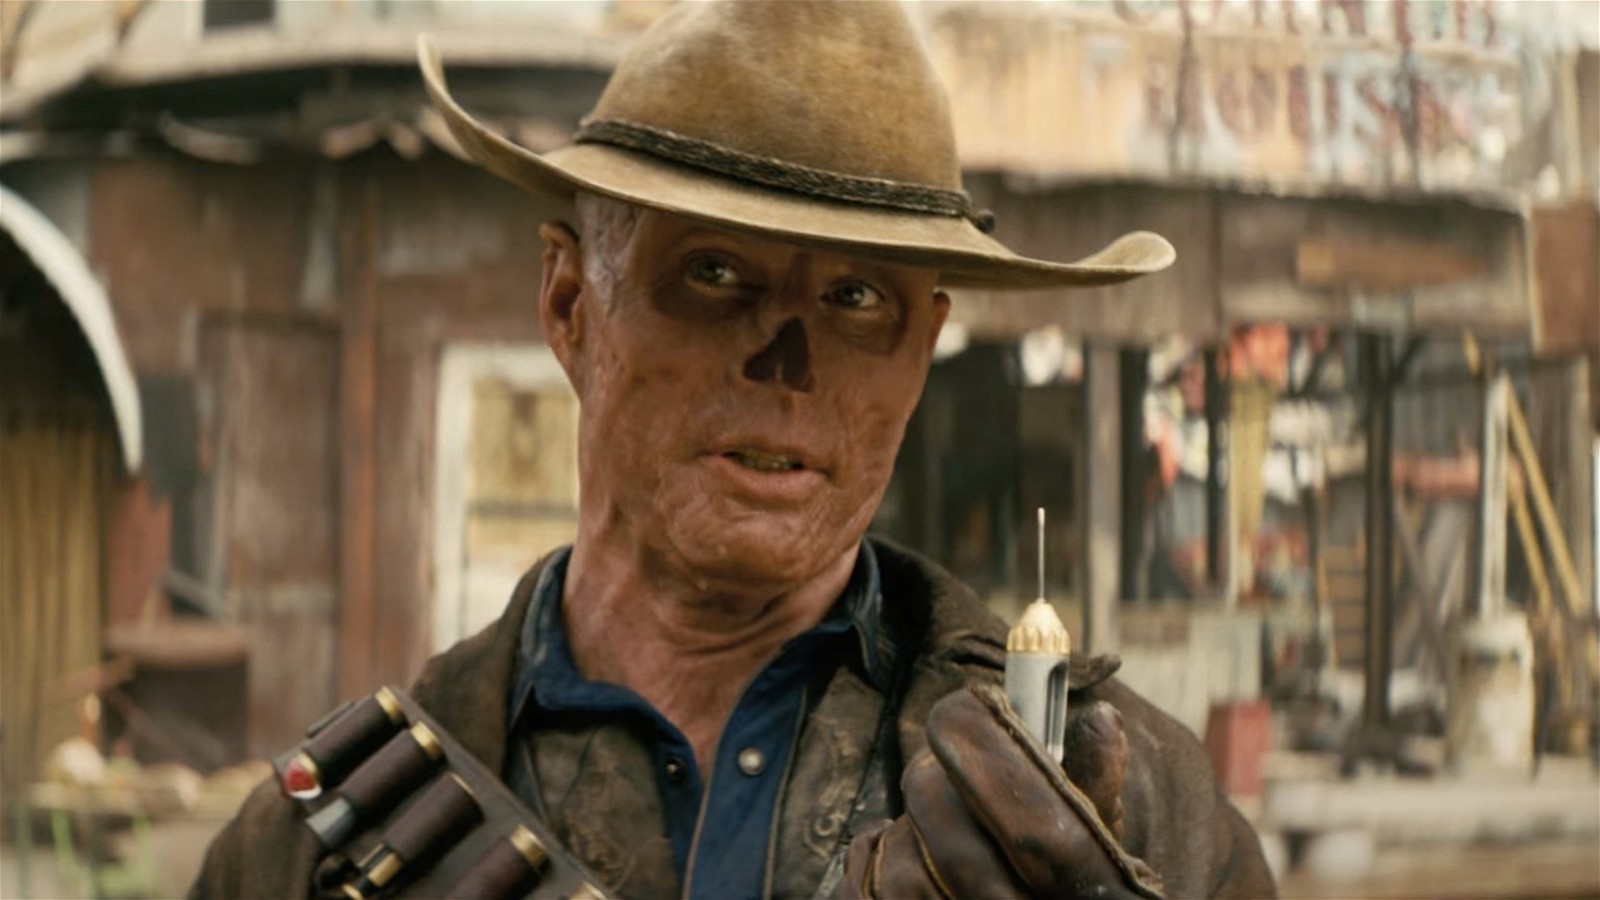 Walton Goggins plays the character of the Ghoul in Prime Video's Fallout